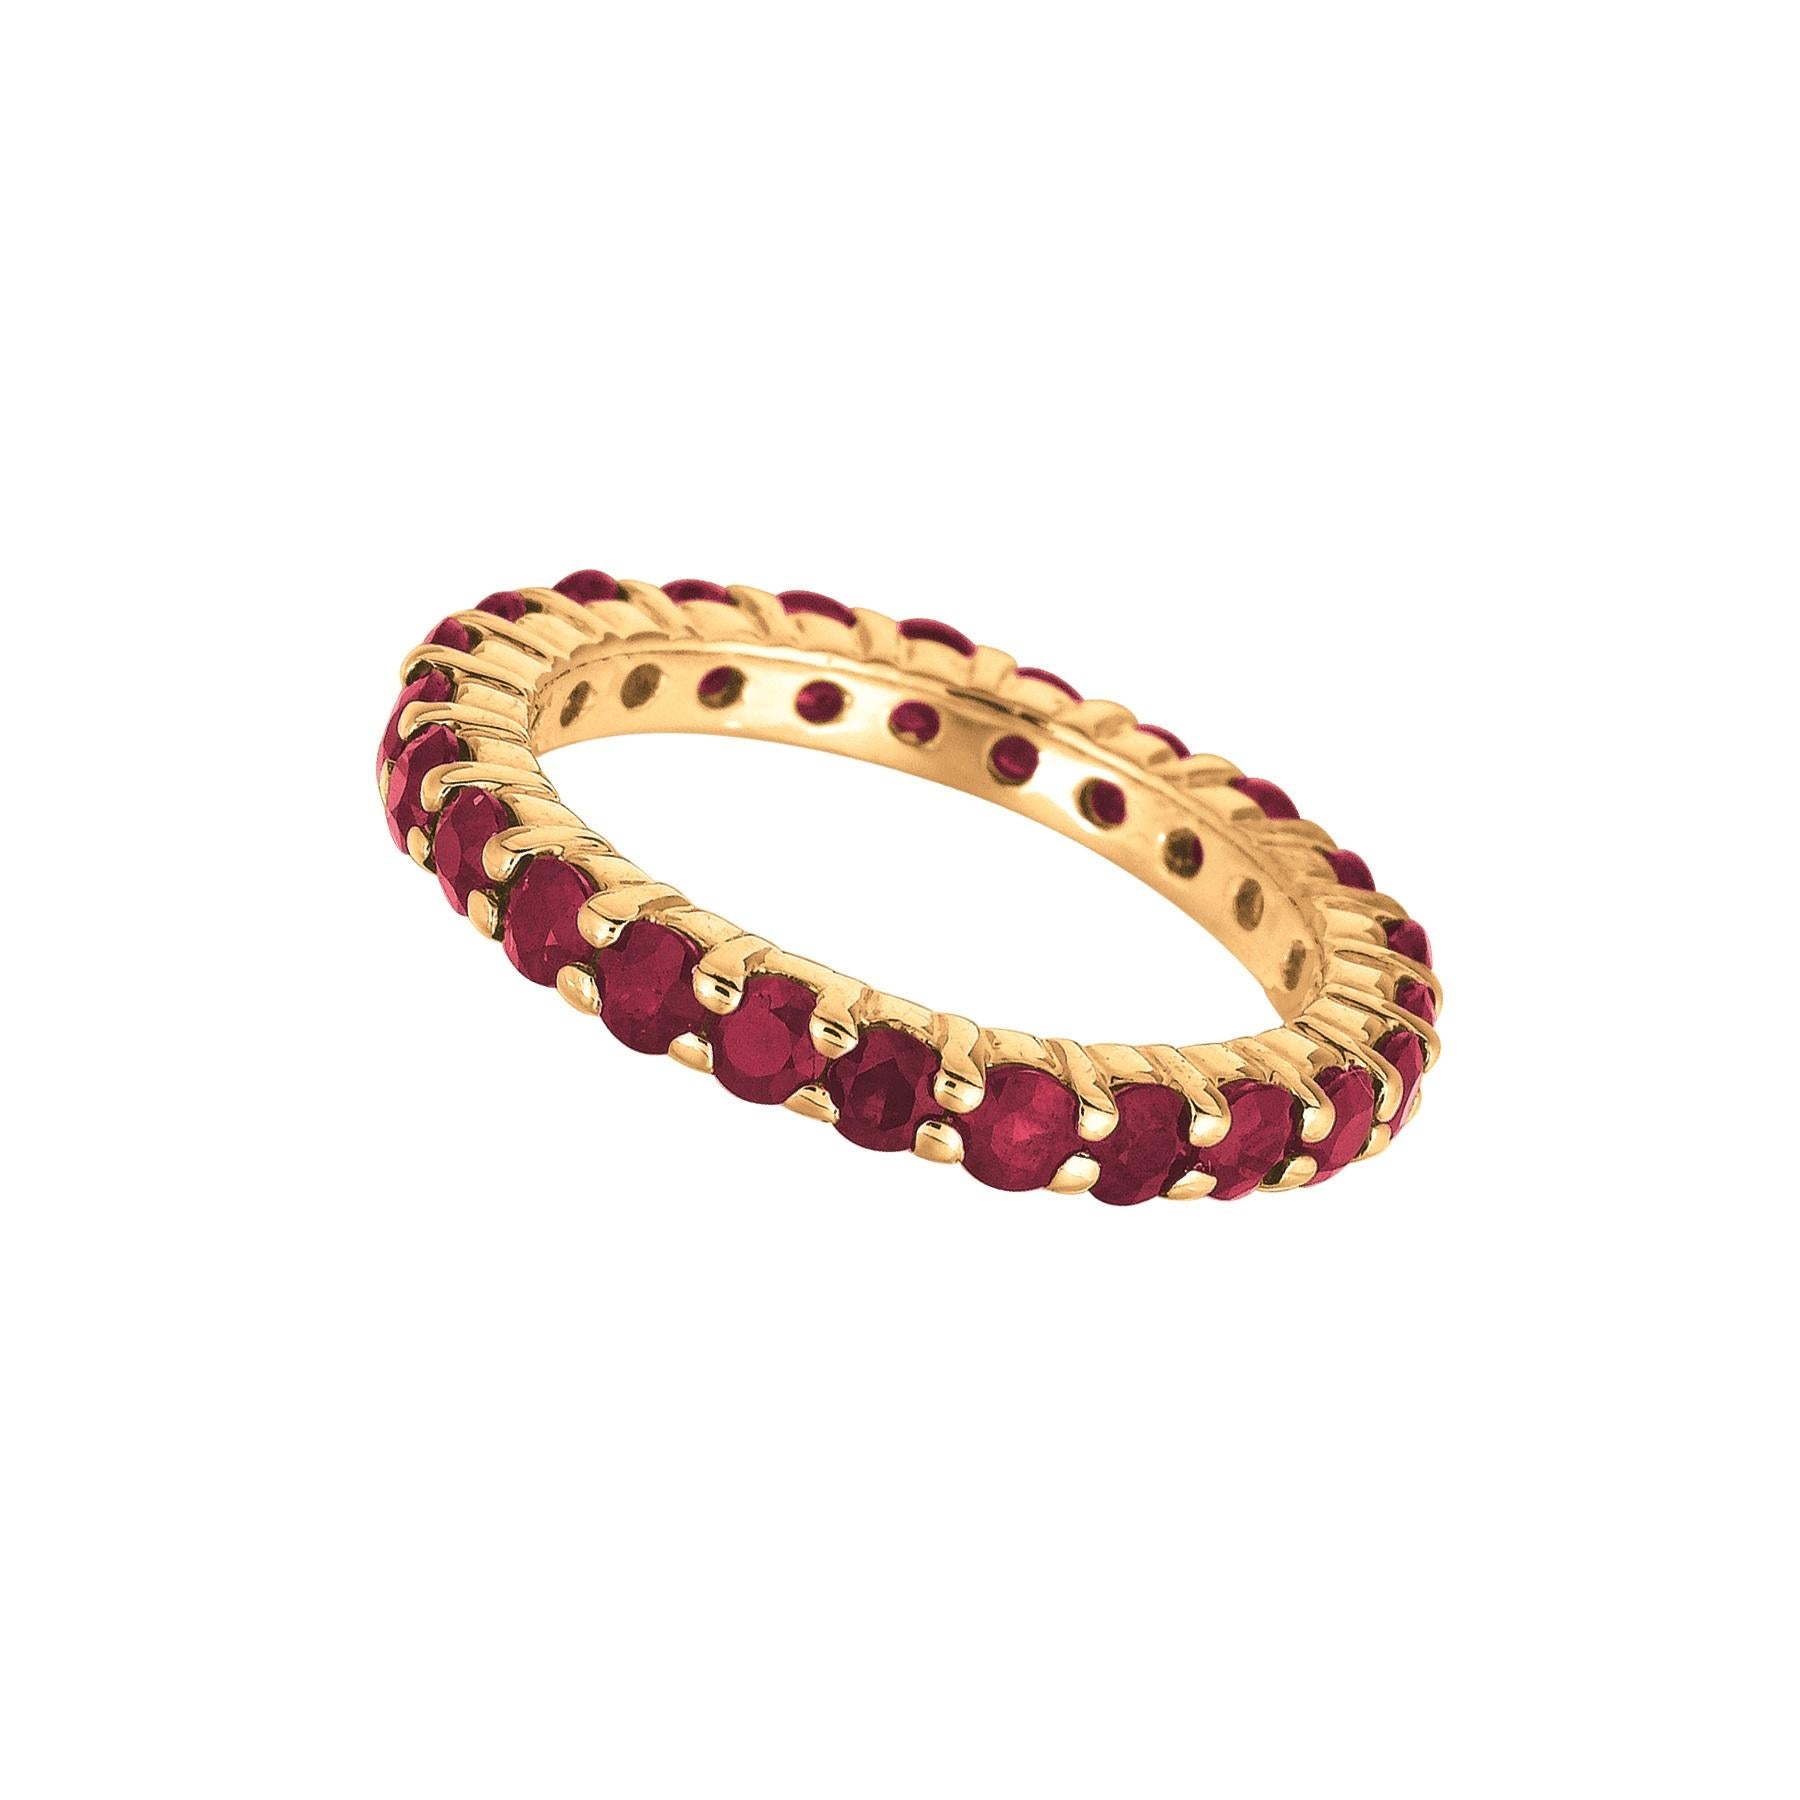 2.80 Carat Natural Ruby Eternity Ring G SI 14K Yellow Gold

100% Natural Rubies
2.80CTW
Red
SI
14K Yellow Gold Prong style, 3.30 grams
2.5 mm in width
Size 7
23 rubies

MM40YR
ALL OUR ITEMS ARE AVAILABLE TO BE ORDERED IN 14K WHITE, ROSE OR YELLOW